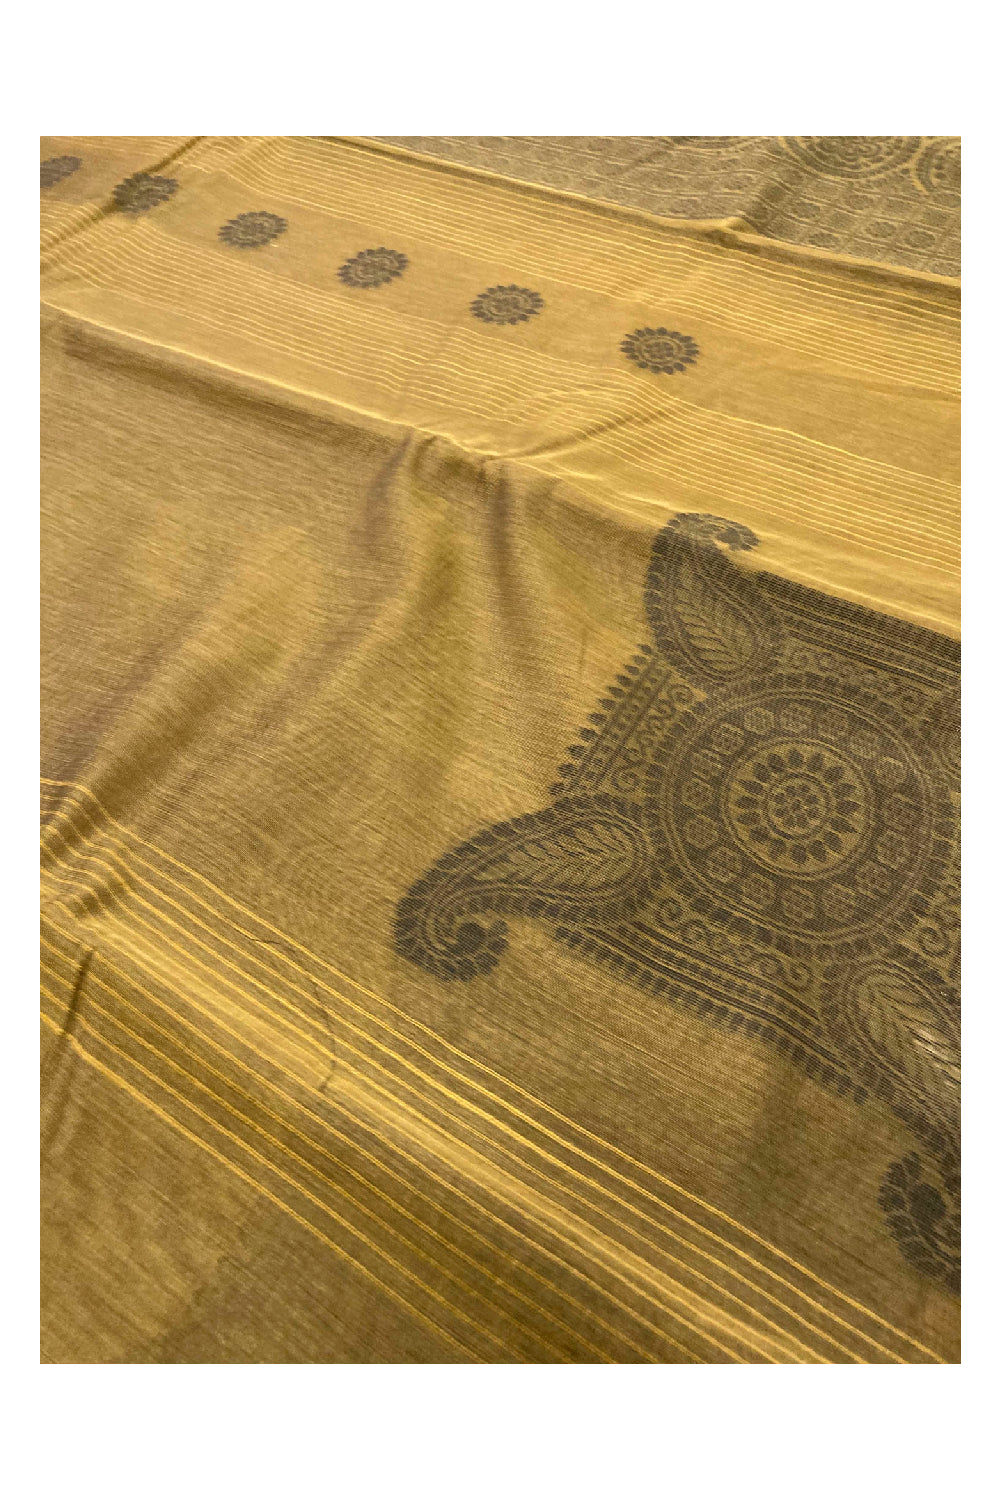 Southloom Sico Gadwal Semi Silk Saree in Brown with Floral Motifs (Blouse Piece with Work)